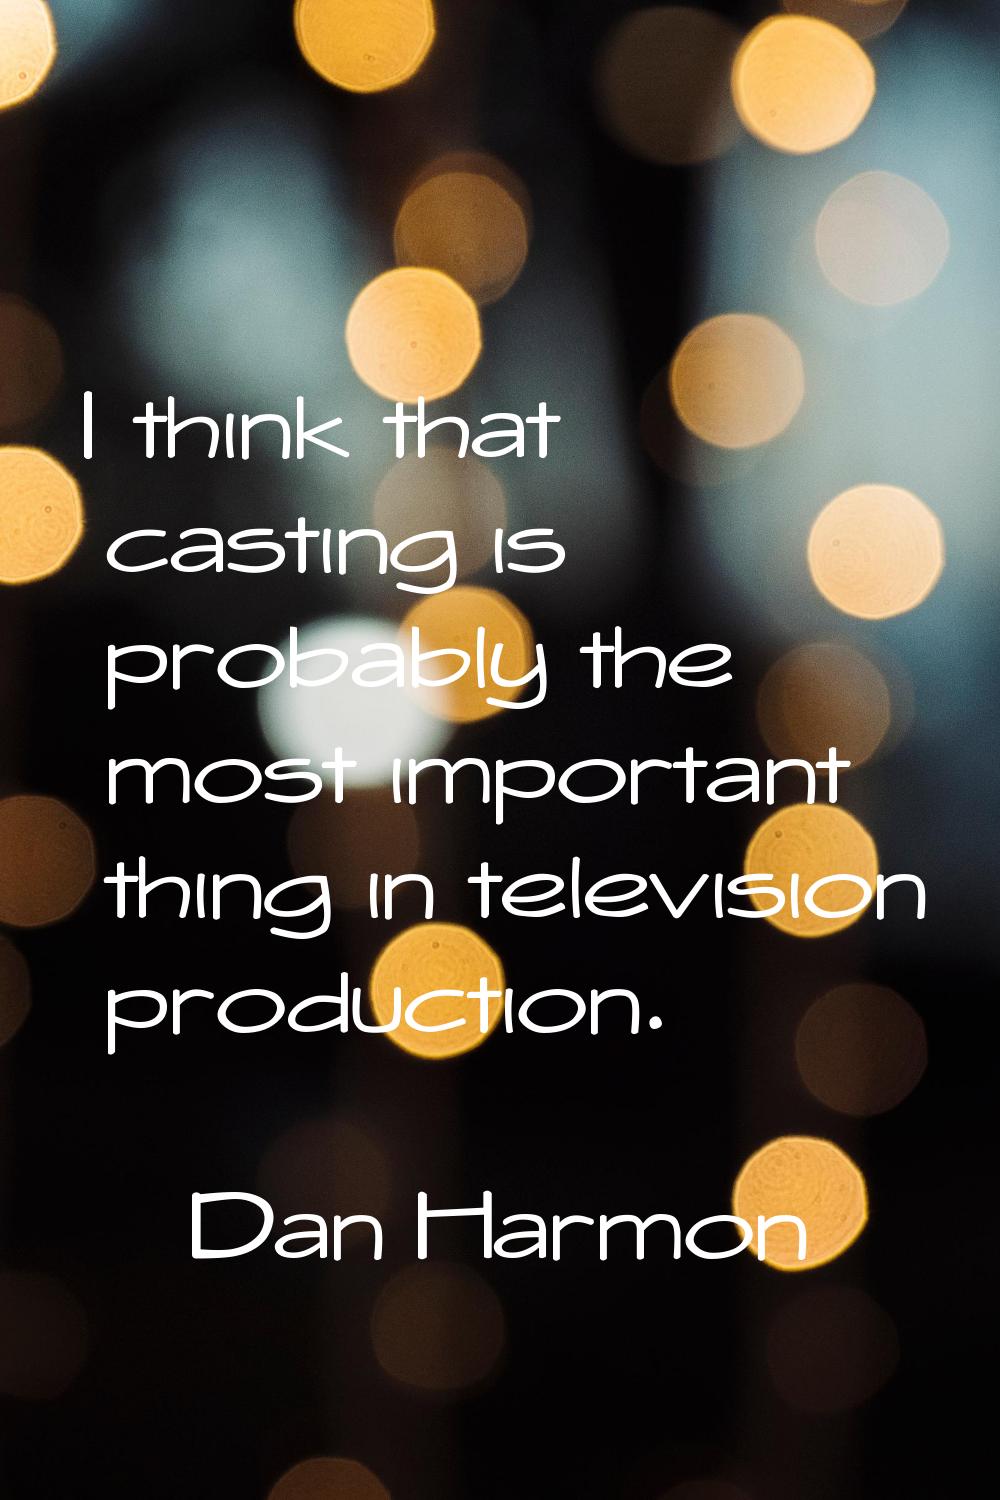 I think that casting is probably the most important thing in television production.